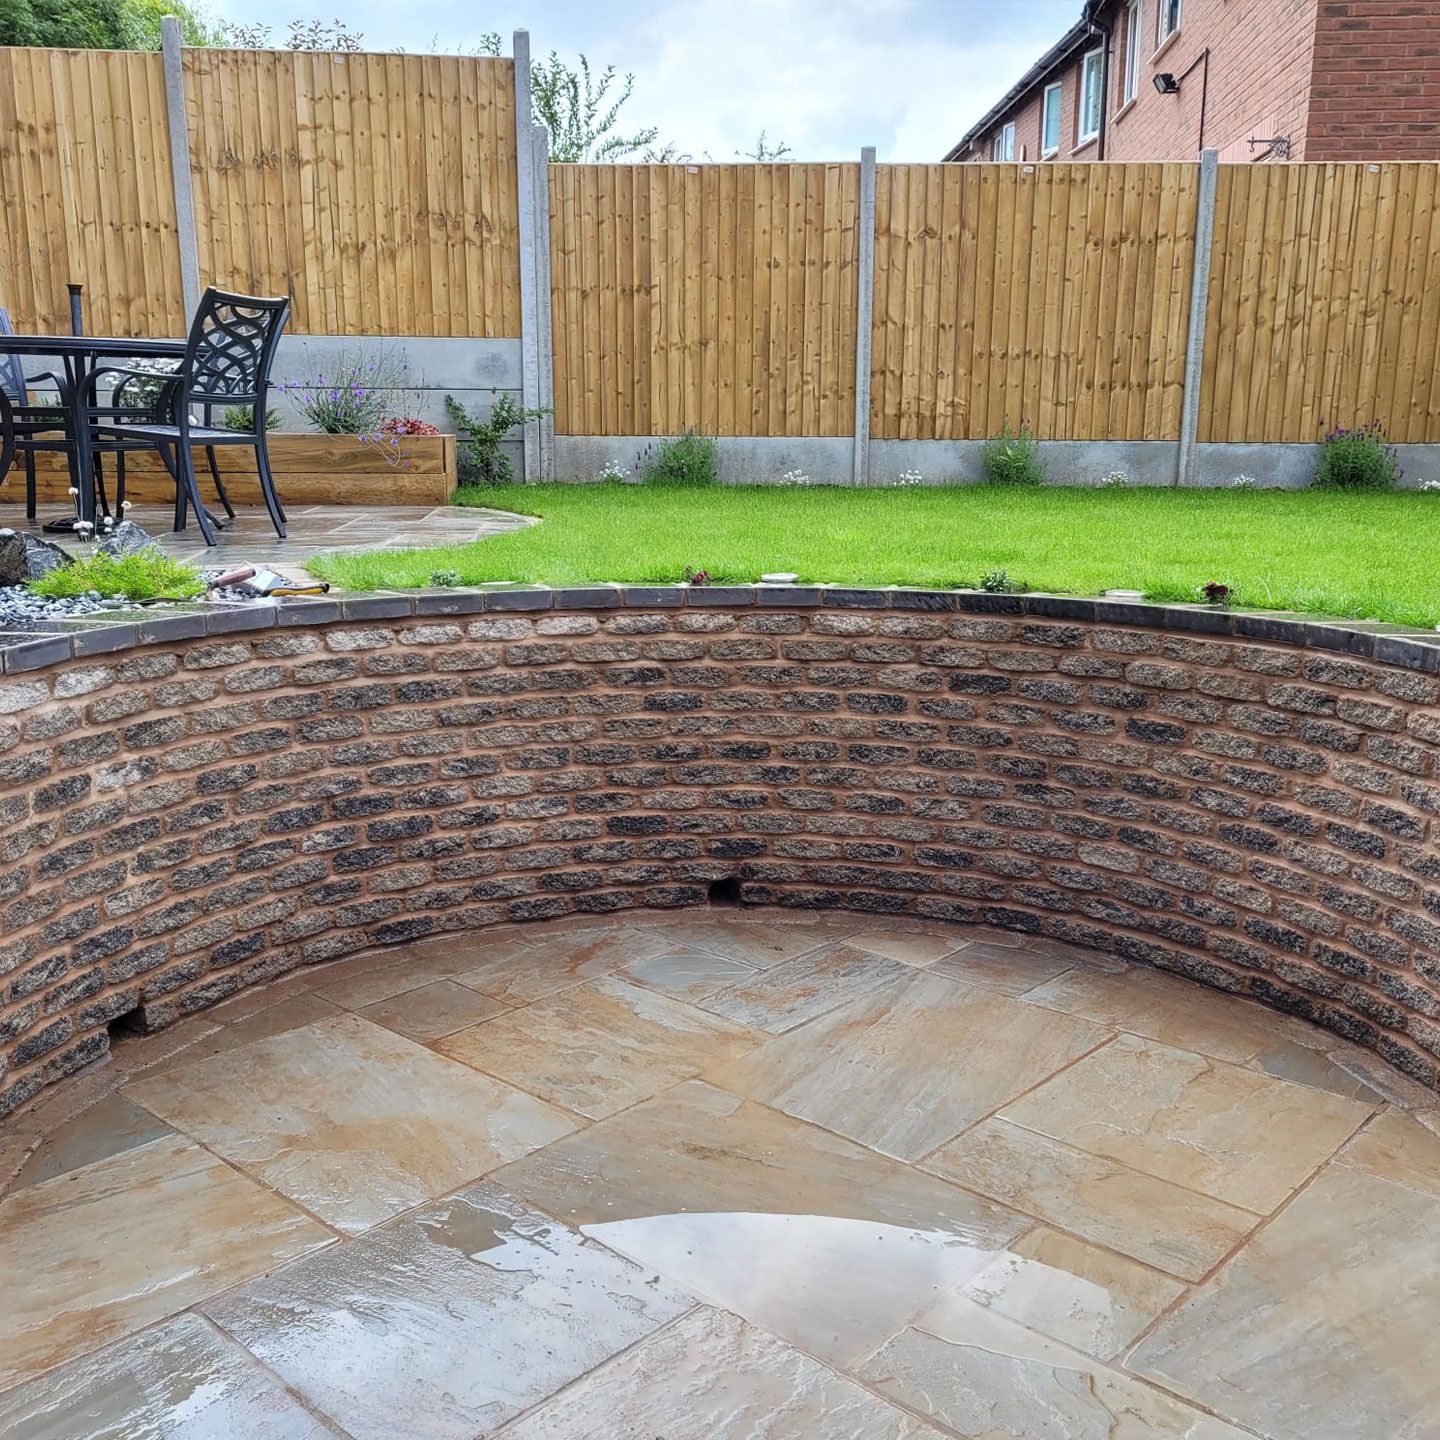 Landscaping services Long Lawford a retaining garden wall